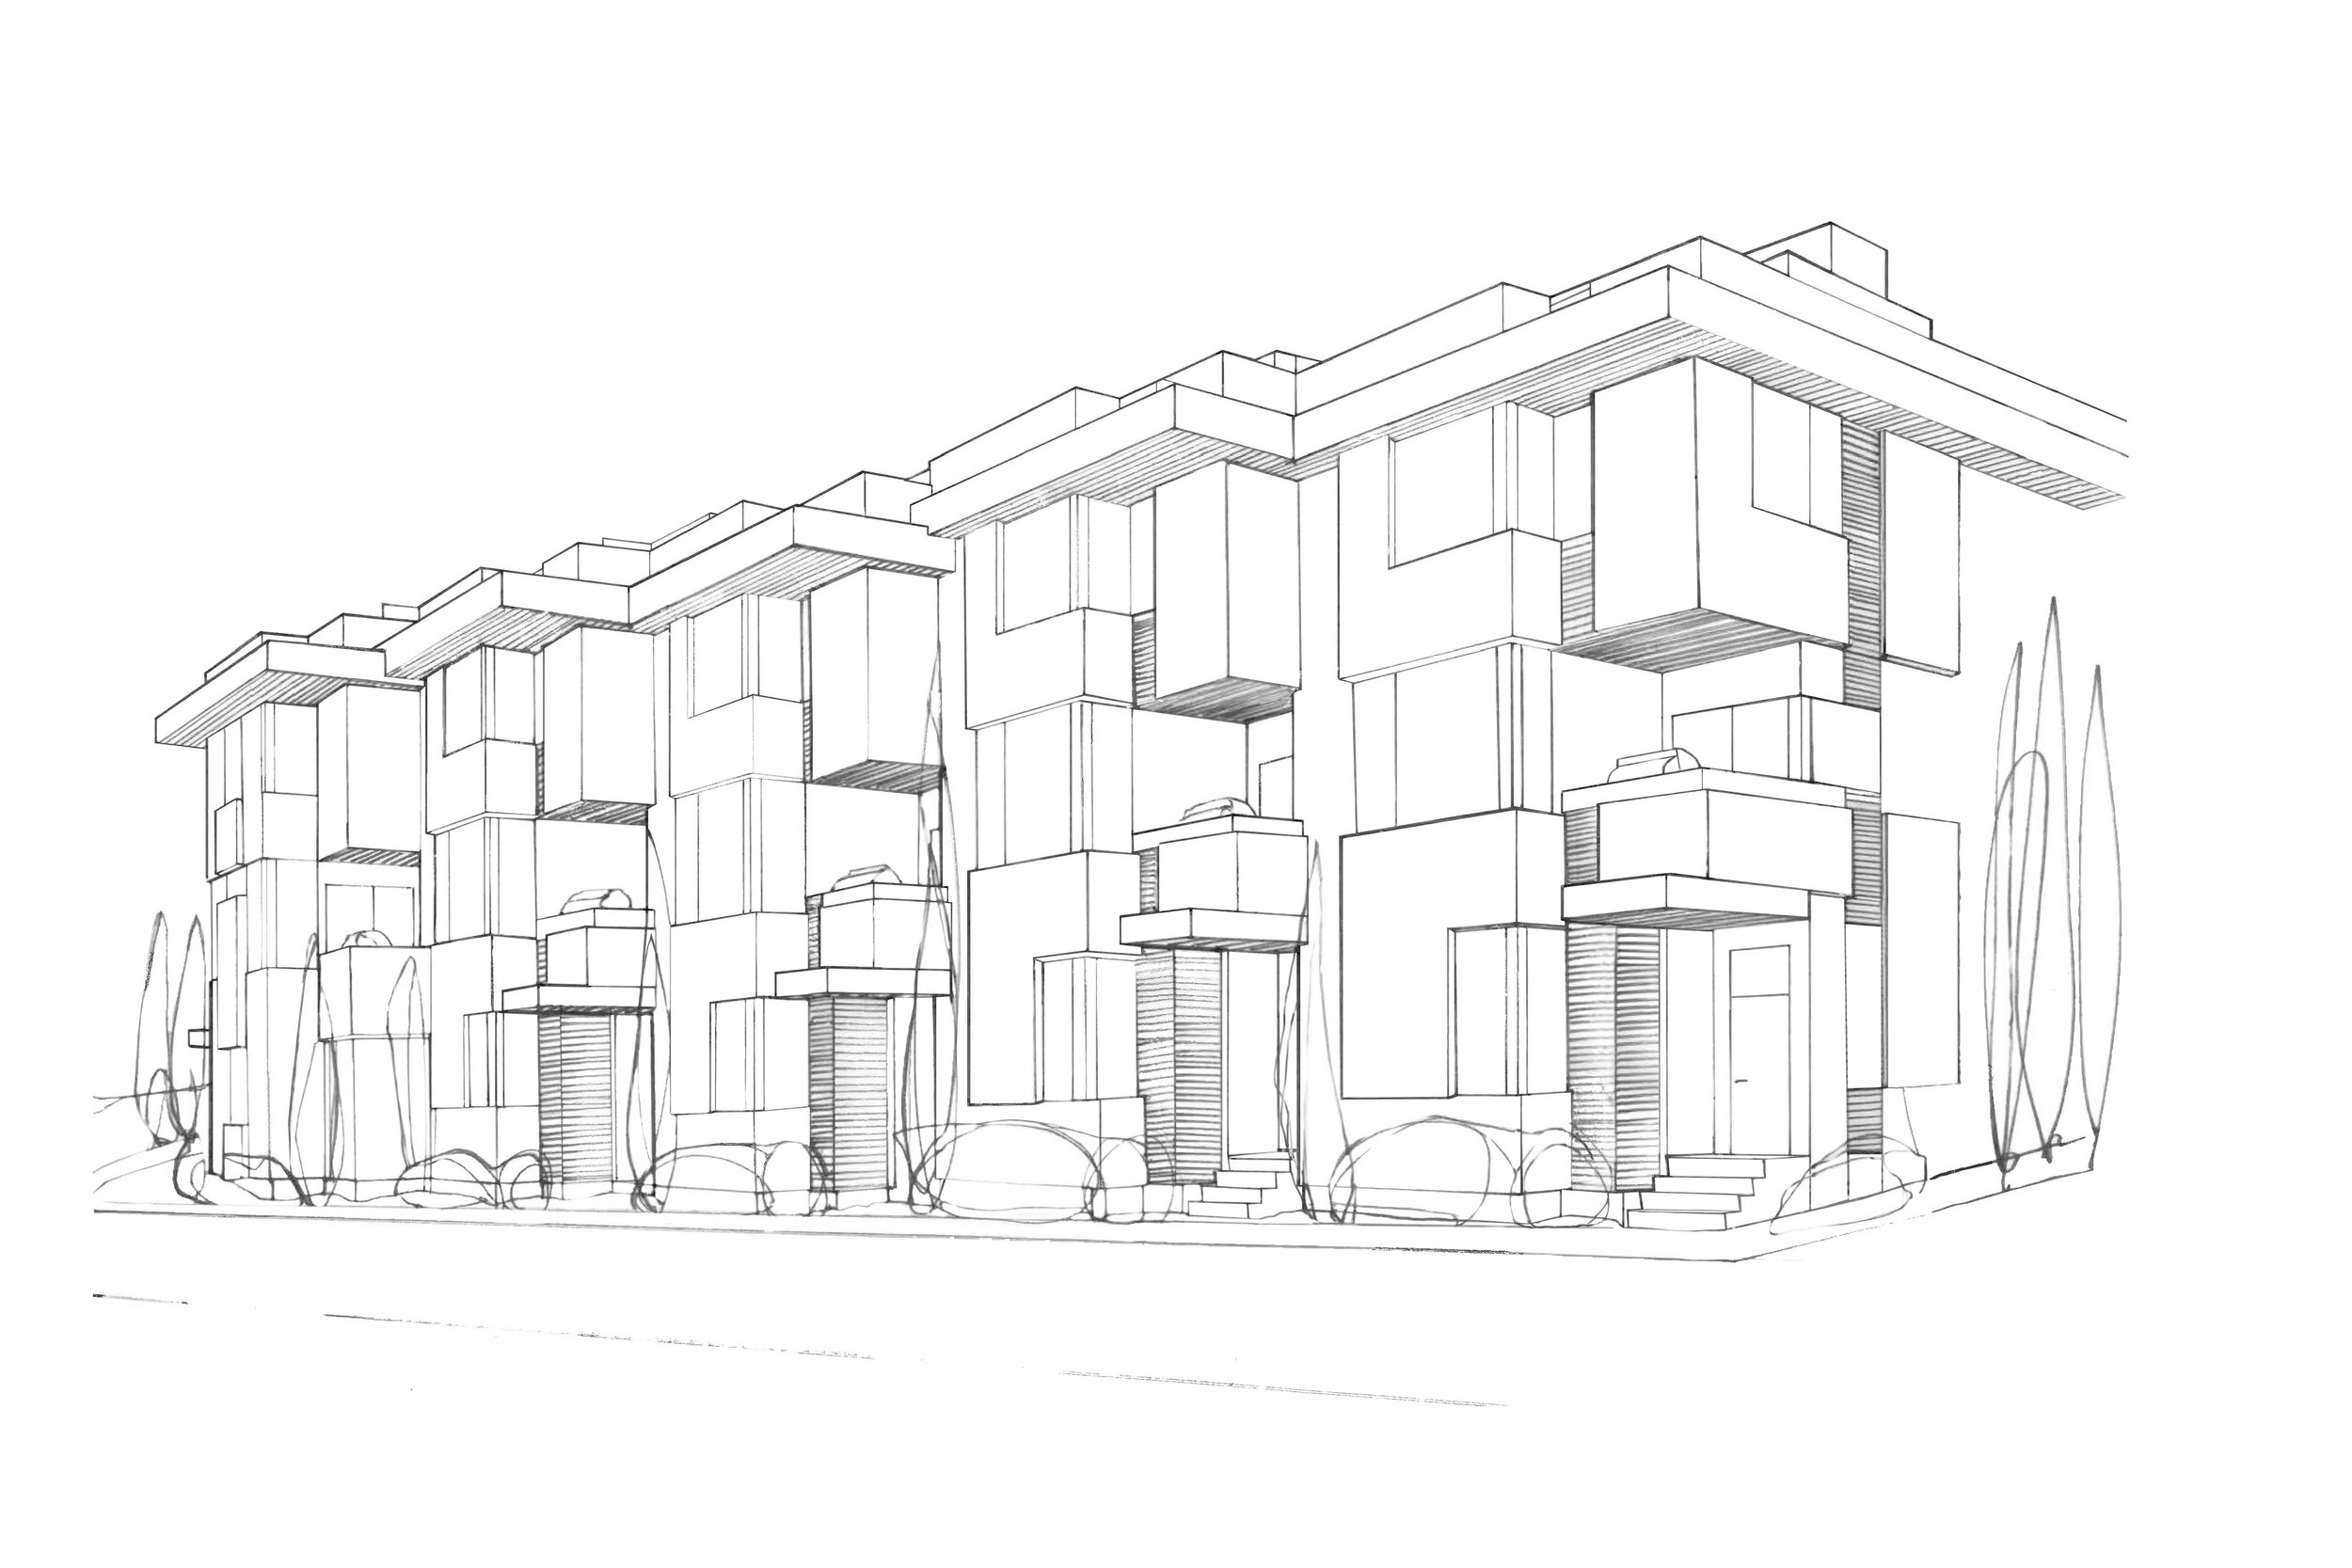 826 16TH ST NW options 2019.12.17 - Sketch NW View.jpg